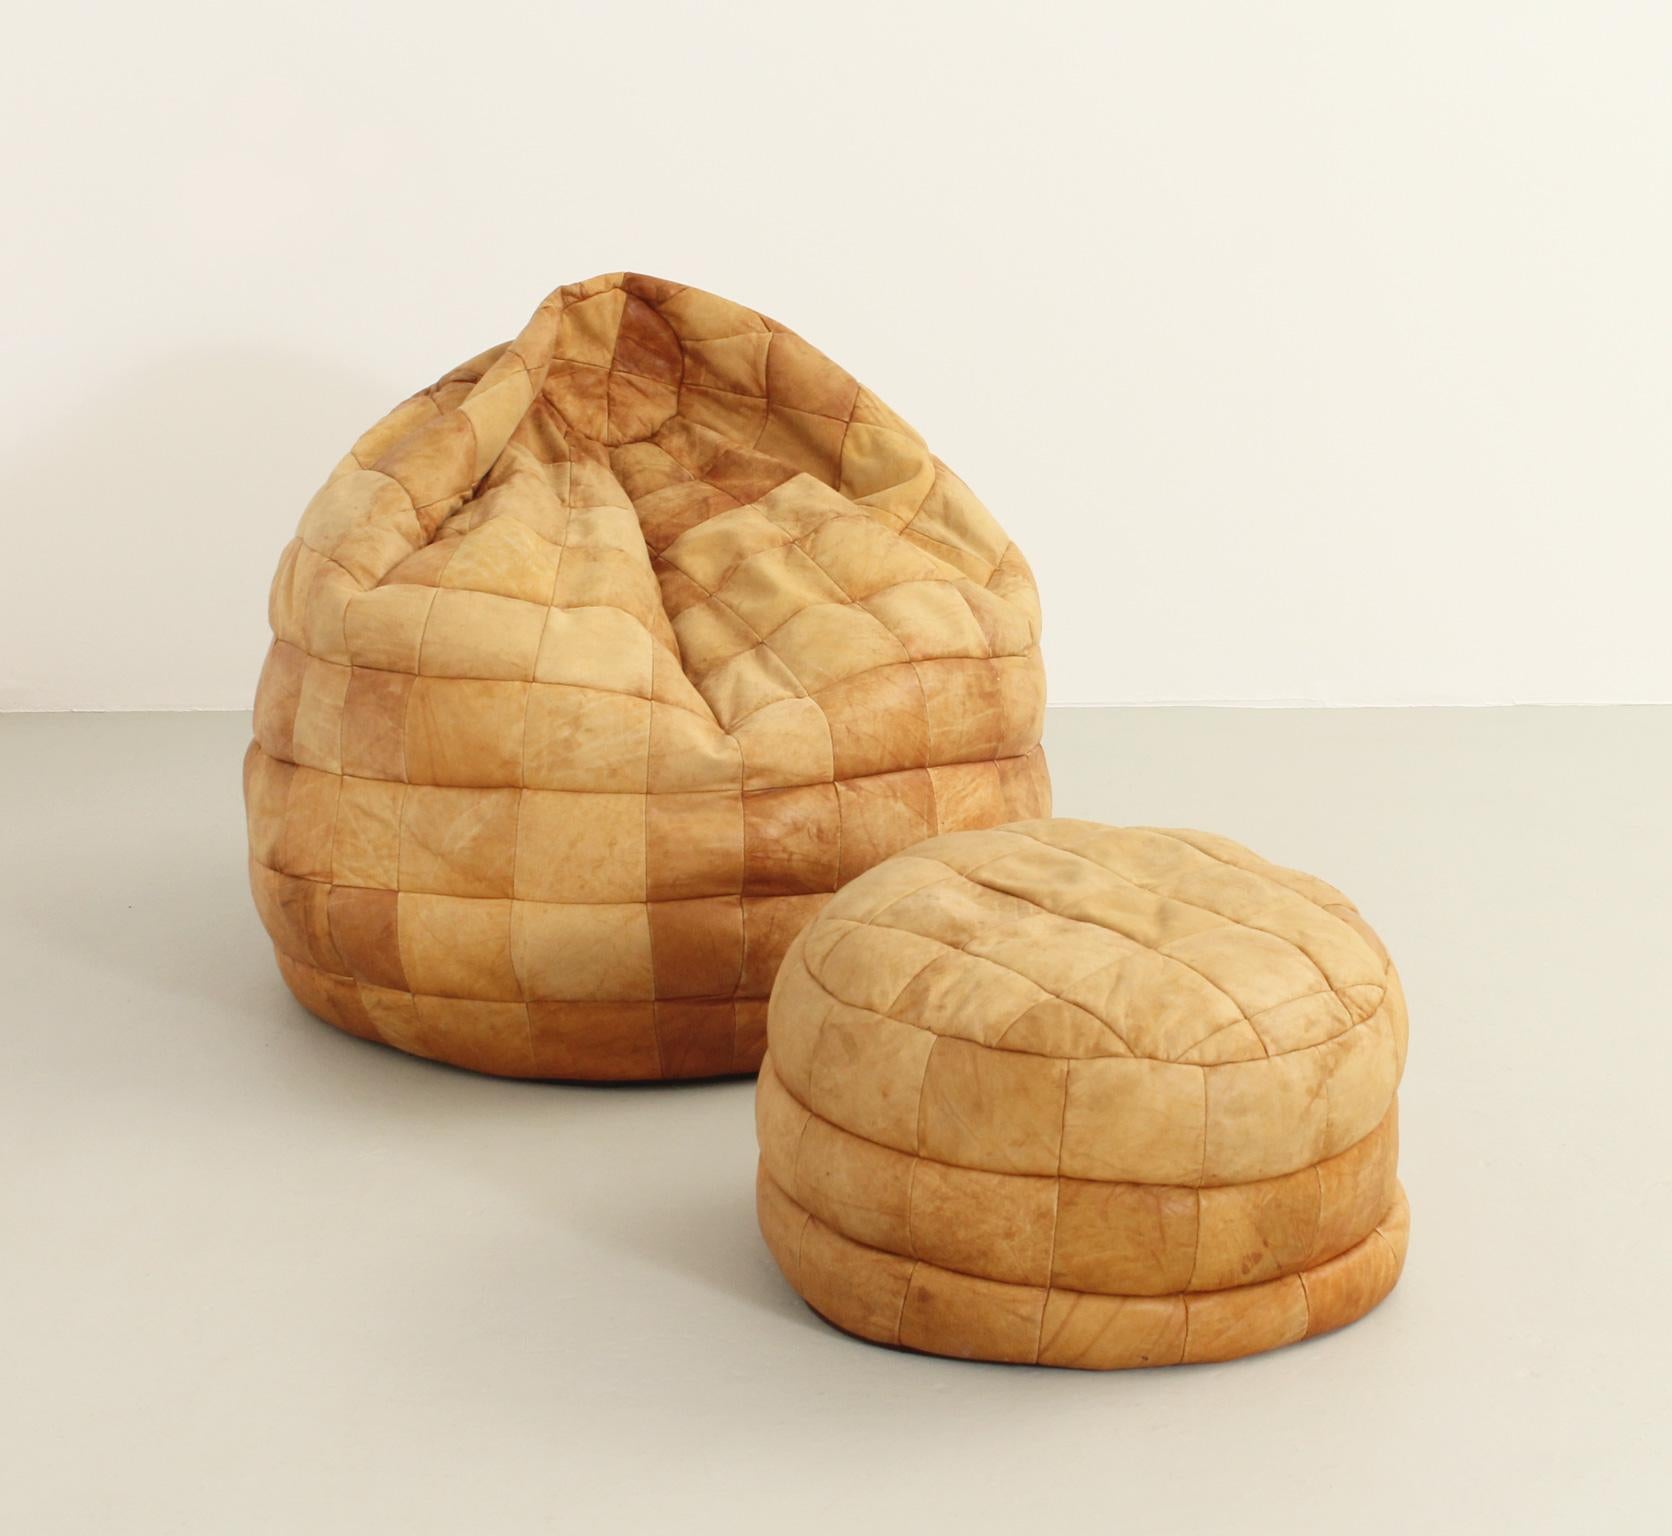 Leather bean bag and ottoman by De Sede, Switzerland, 1970's. Patchwork leather filled with polystyrene balls that conforms to the shape of the body.

Dimensions: 95 Ø x 80 H. cm. Seat and 58 Ø x 38 H. cm. Ottoman.